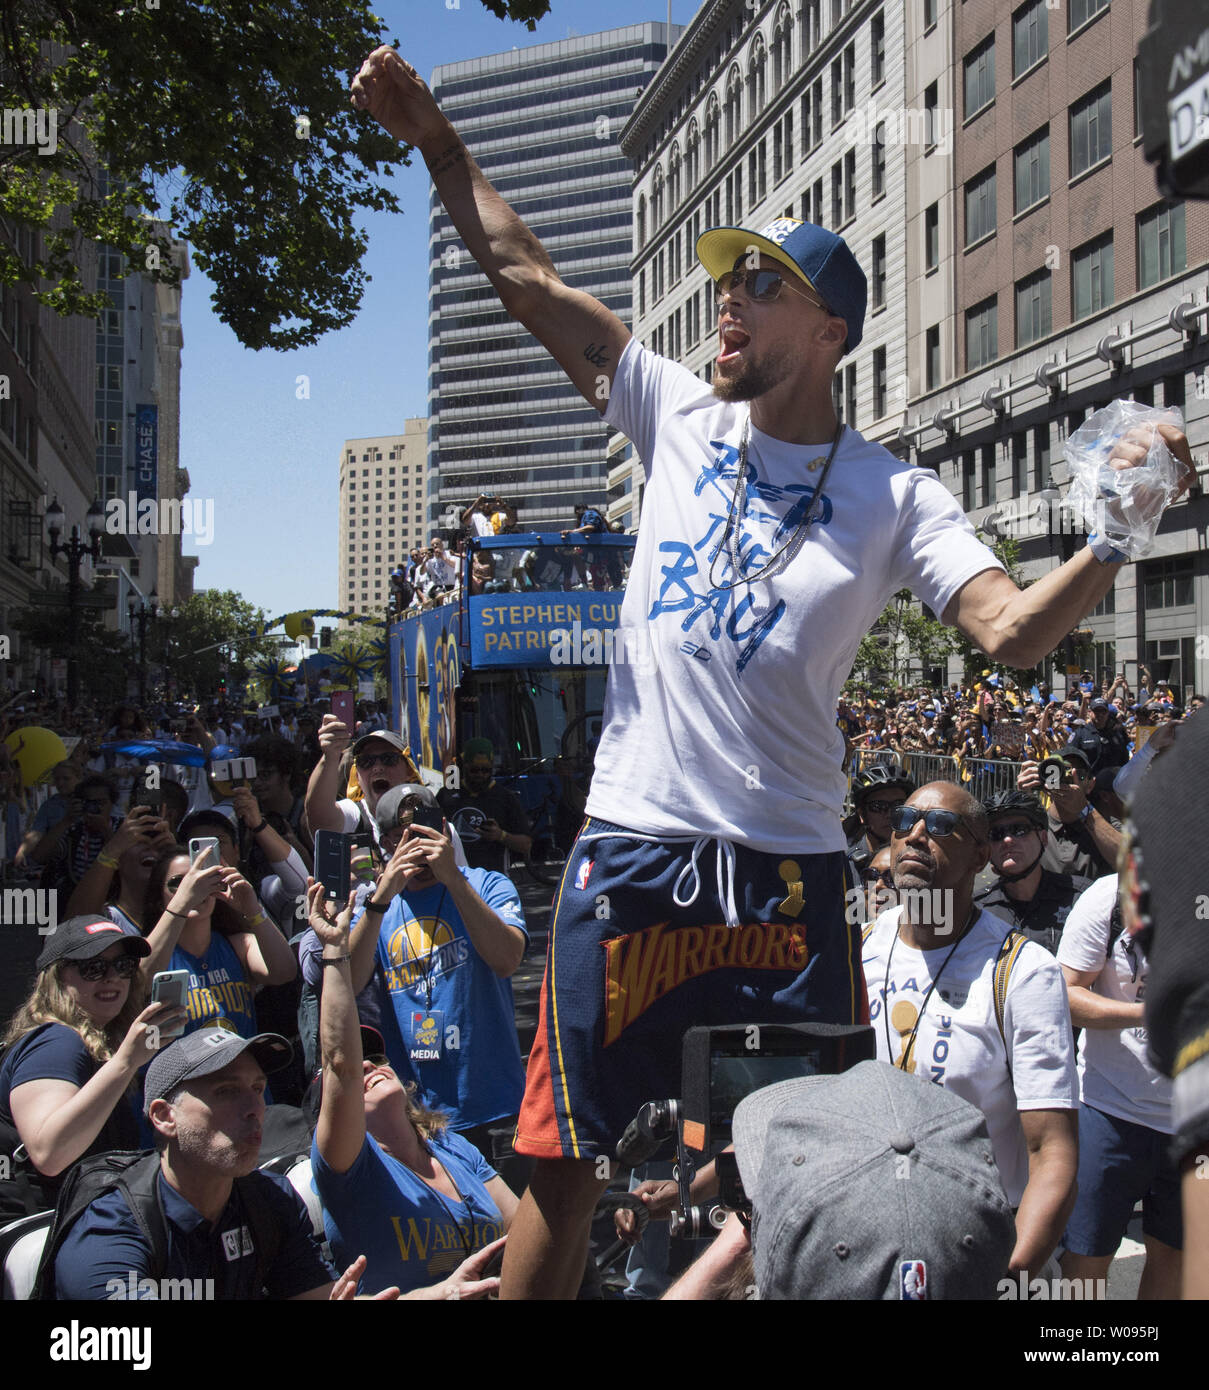 Golden State Warrior Stephen Curry celebrates with fans at the Warriors victory parade in Oakland, California on June 12, 2018